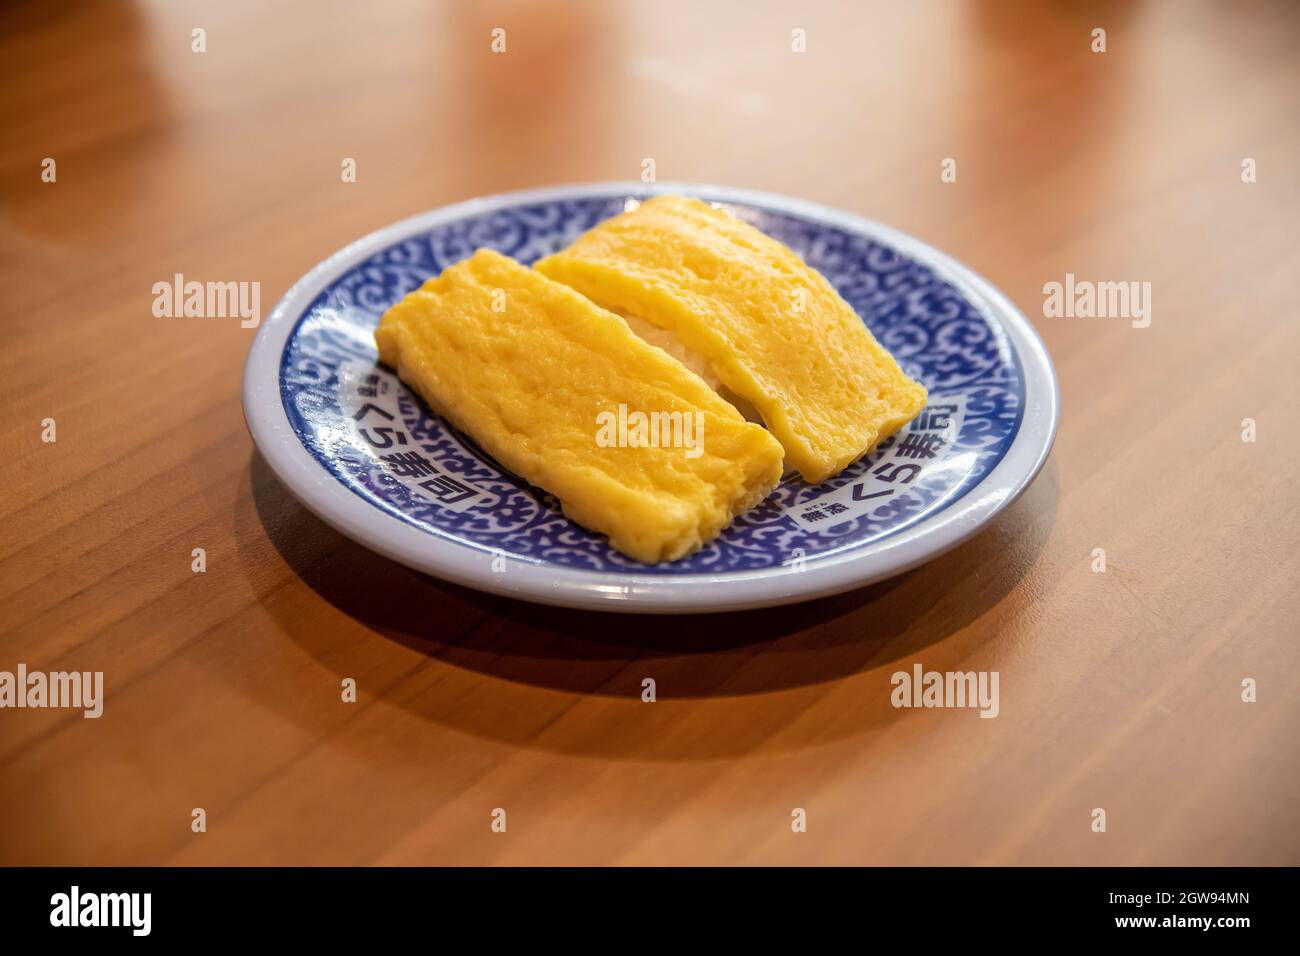 High Angle View Of Sushi In Plate On Table Stock Photo